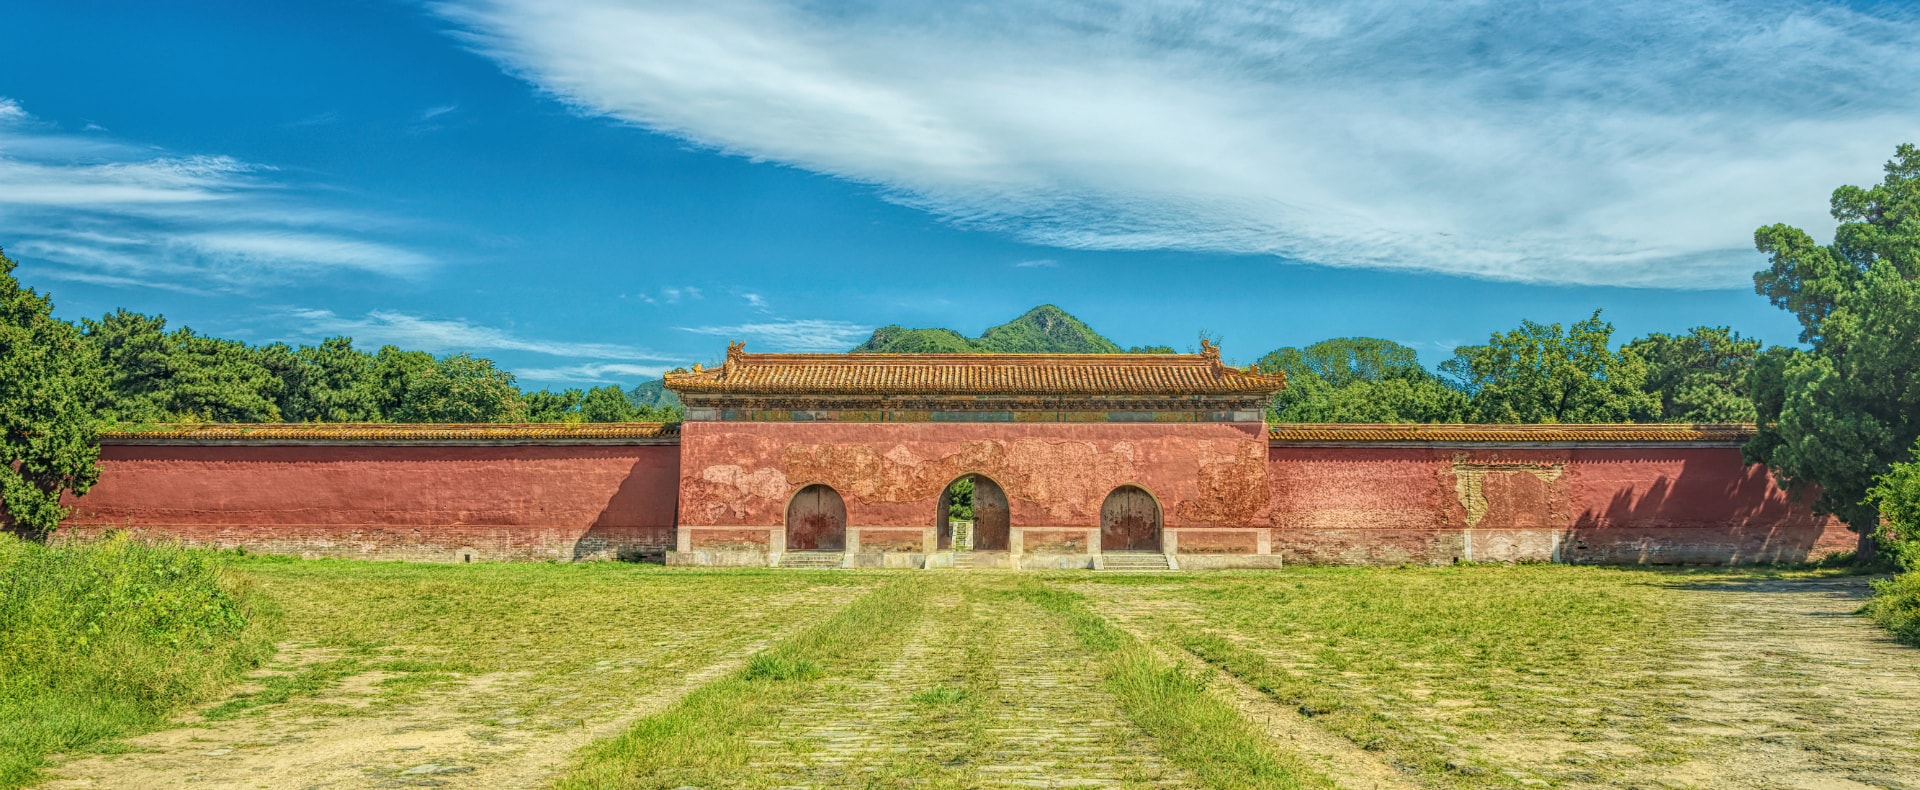  The image shows the gateway to the Ming Dynasty Tombs, a UNESCO World Heritage Site located in China.